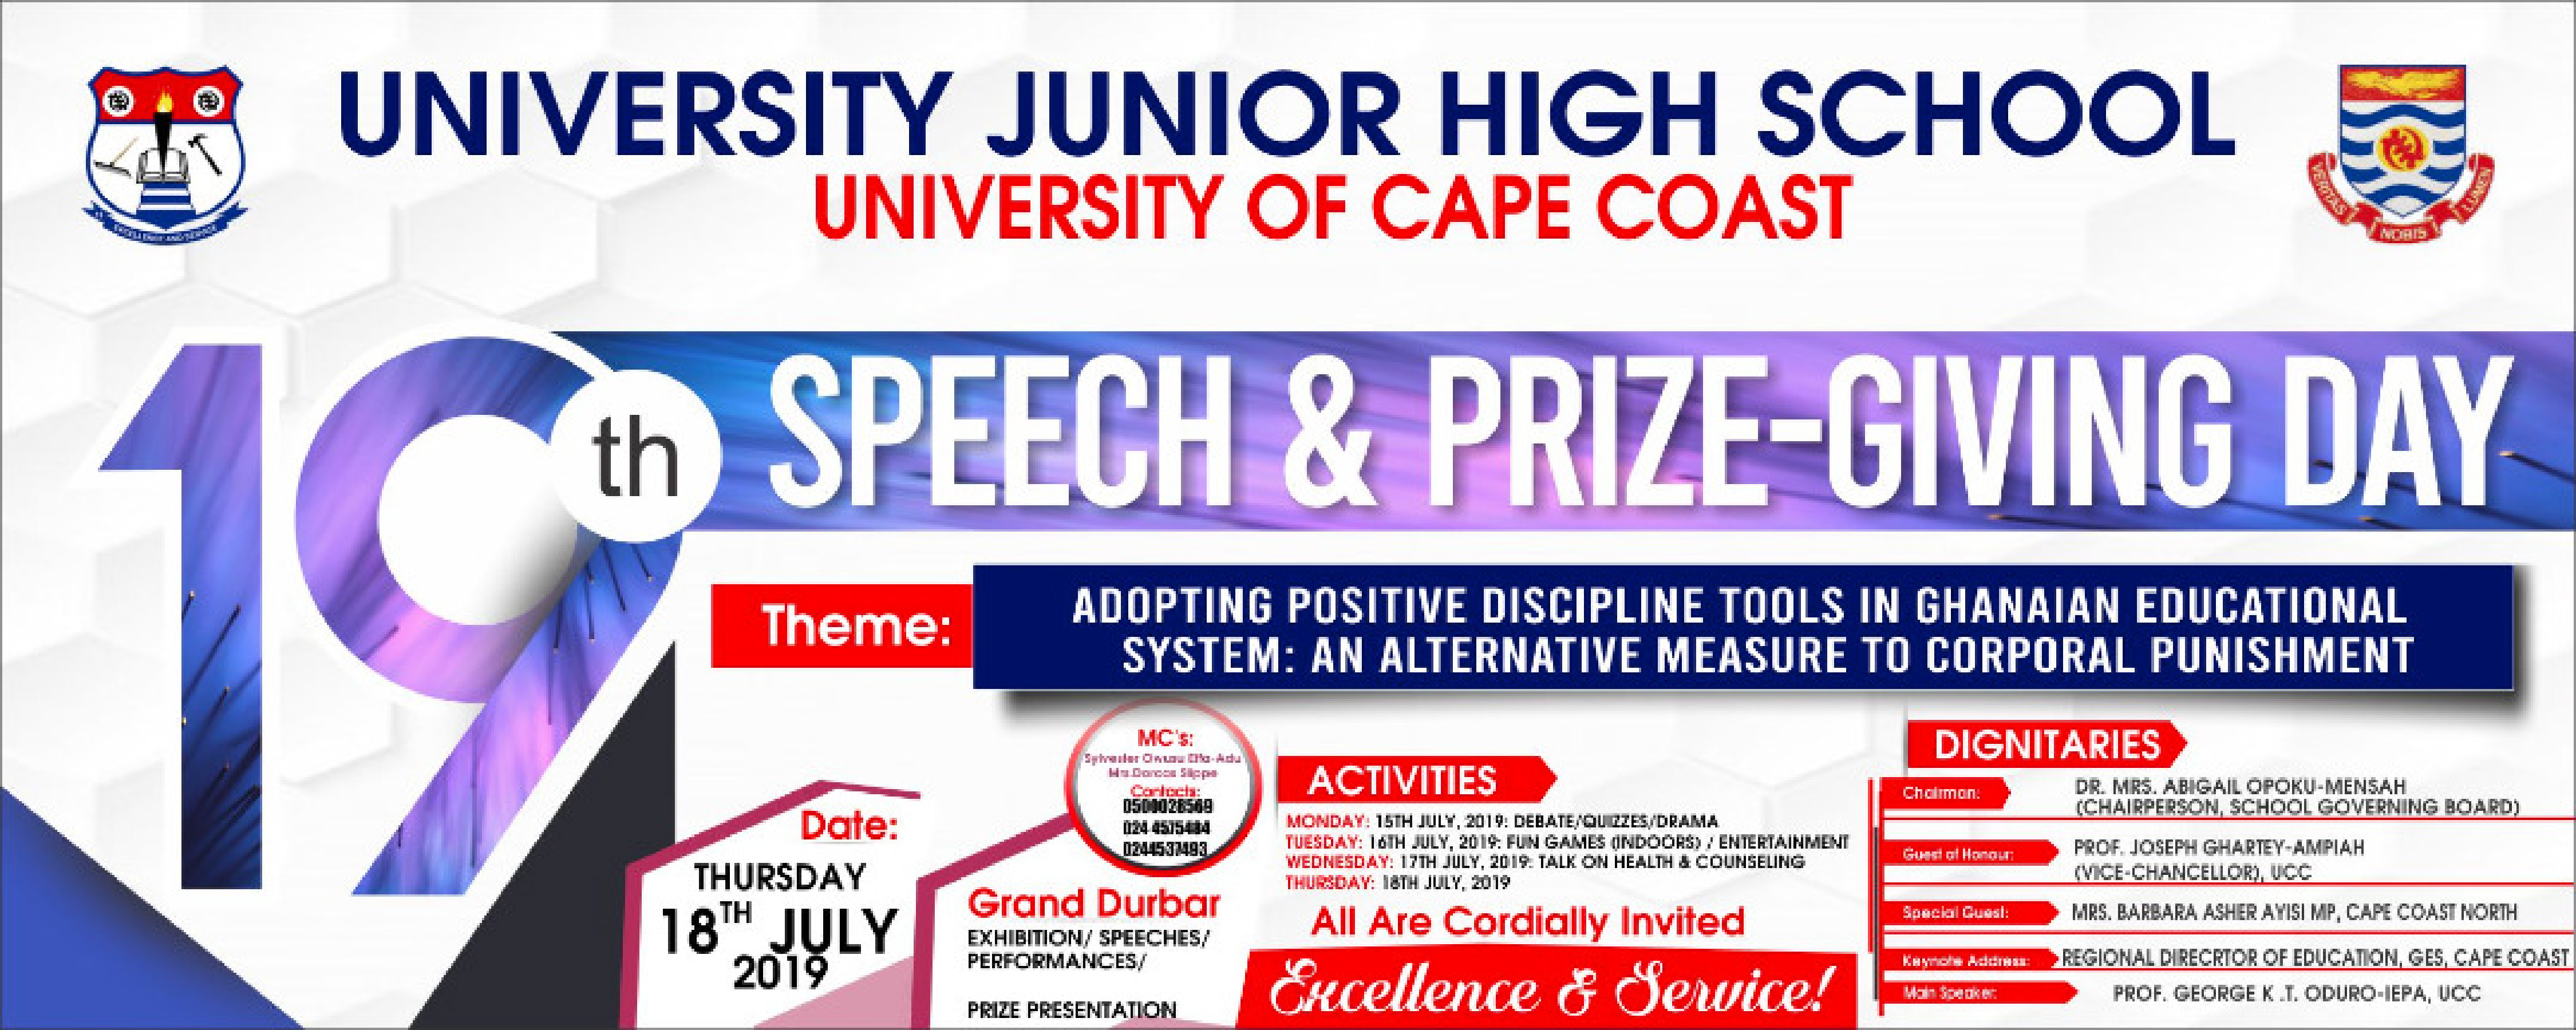 19th Speech and Prize-Giving Day